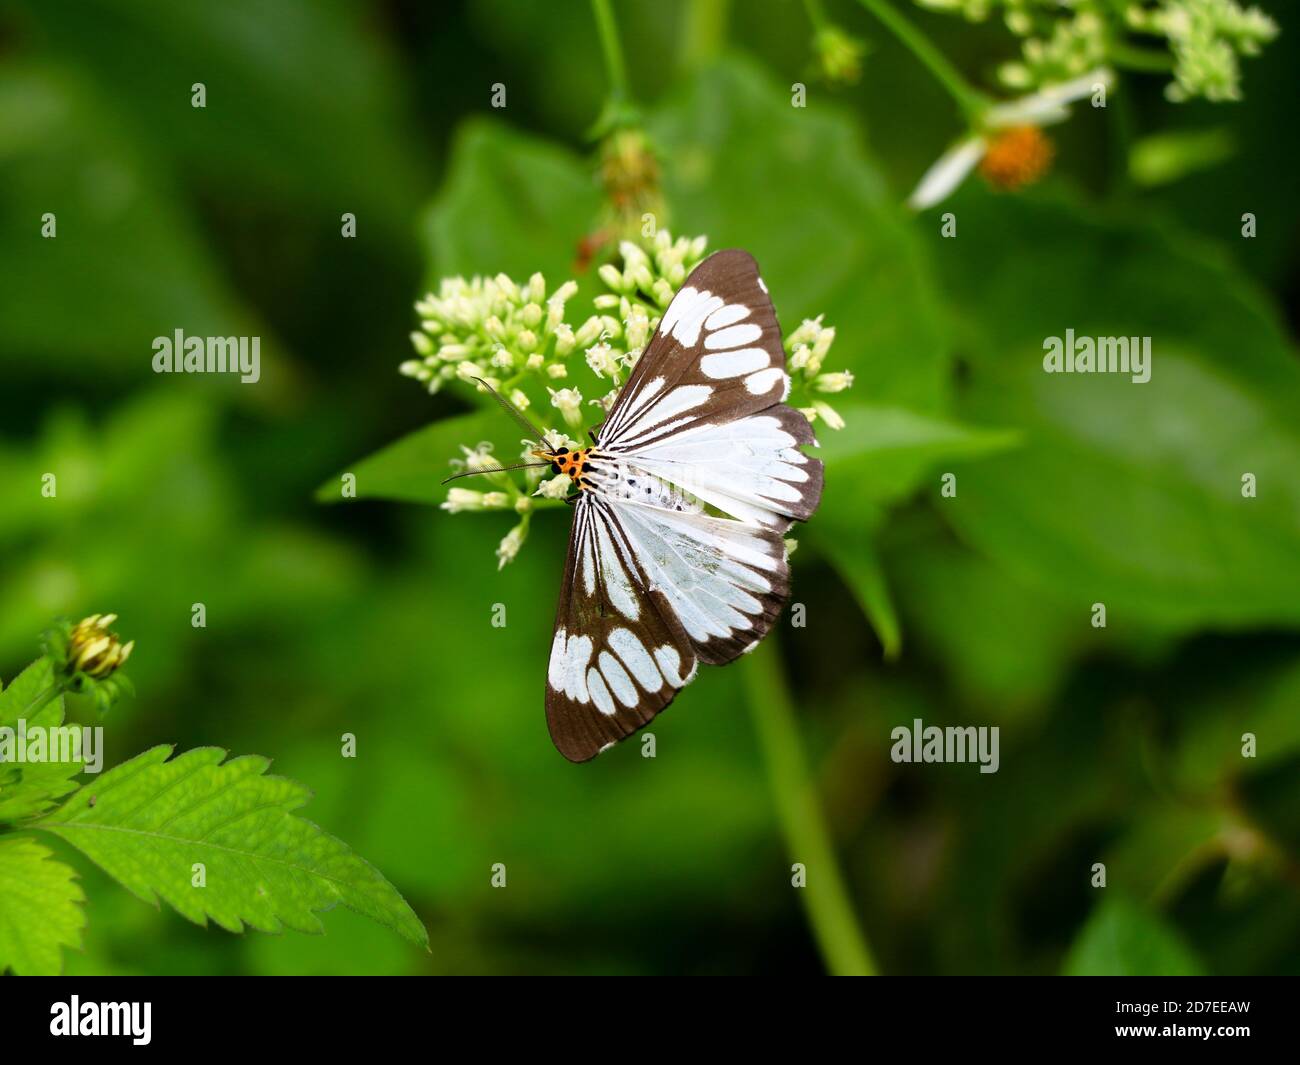 Black and white color butterfly on mikania scandens or climbing hempweed flowers , selective focus Stock Photo